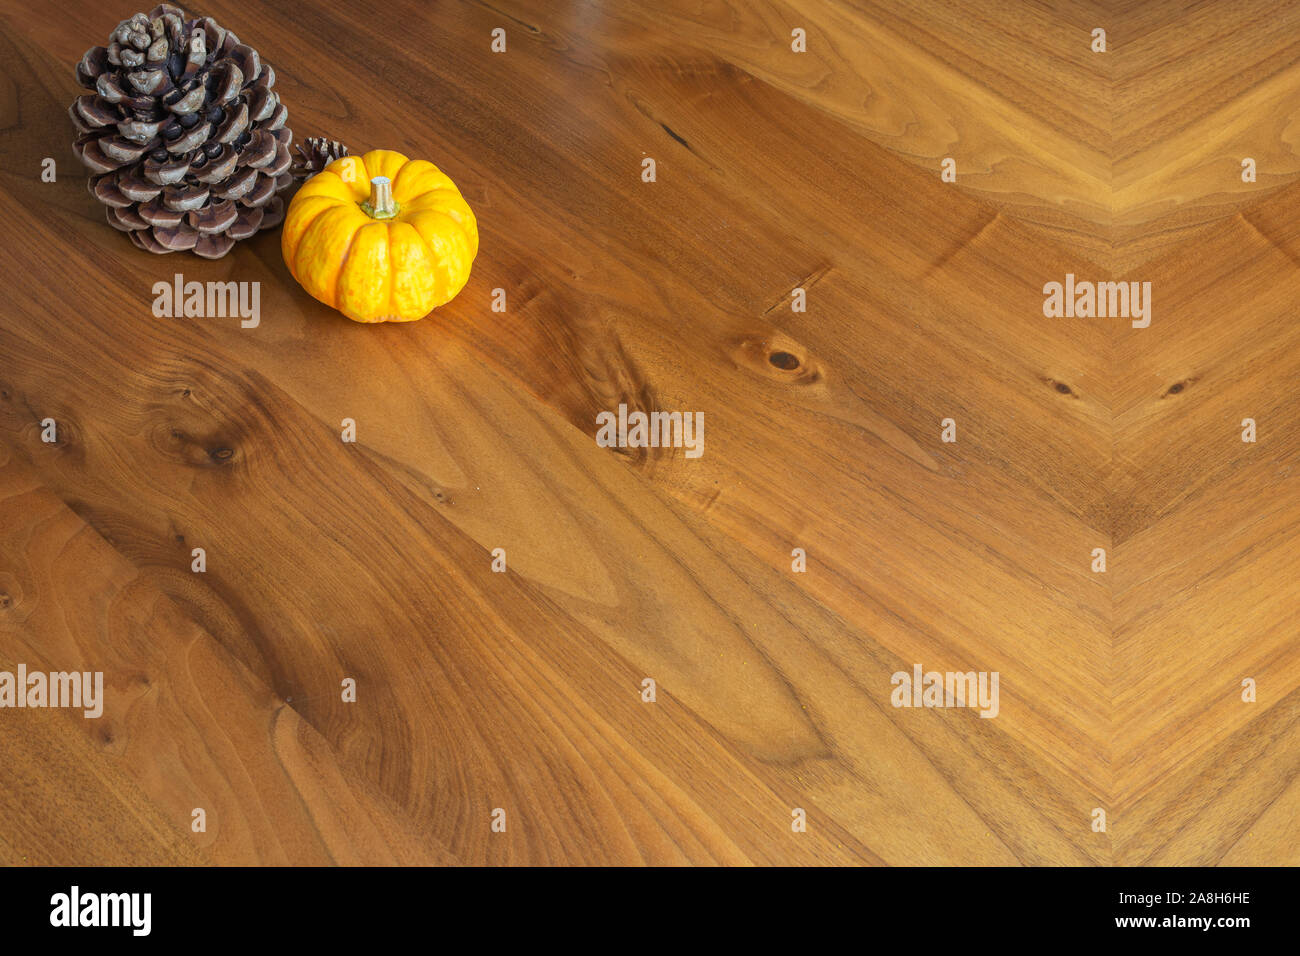 Orange Yellow Pumpkin With Pine Cone On A Brown Wooden Table